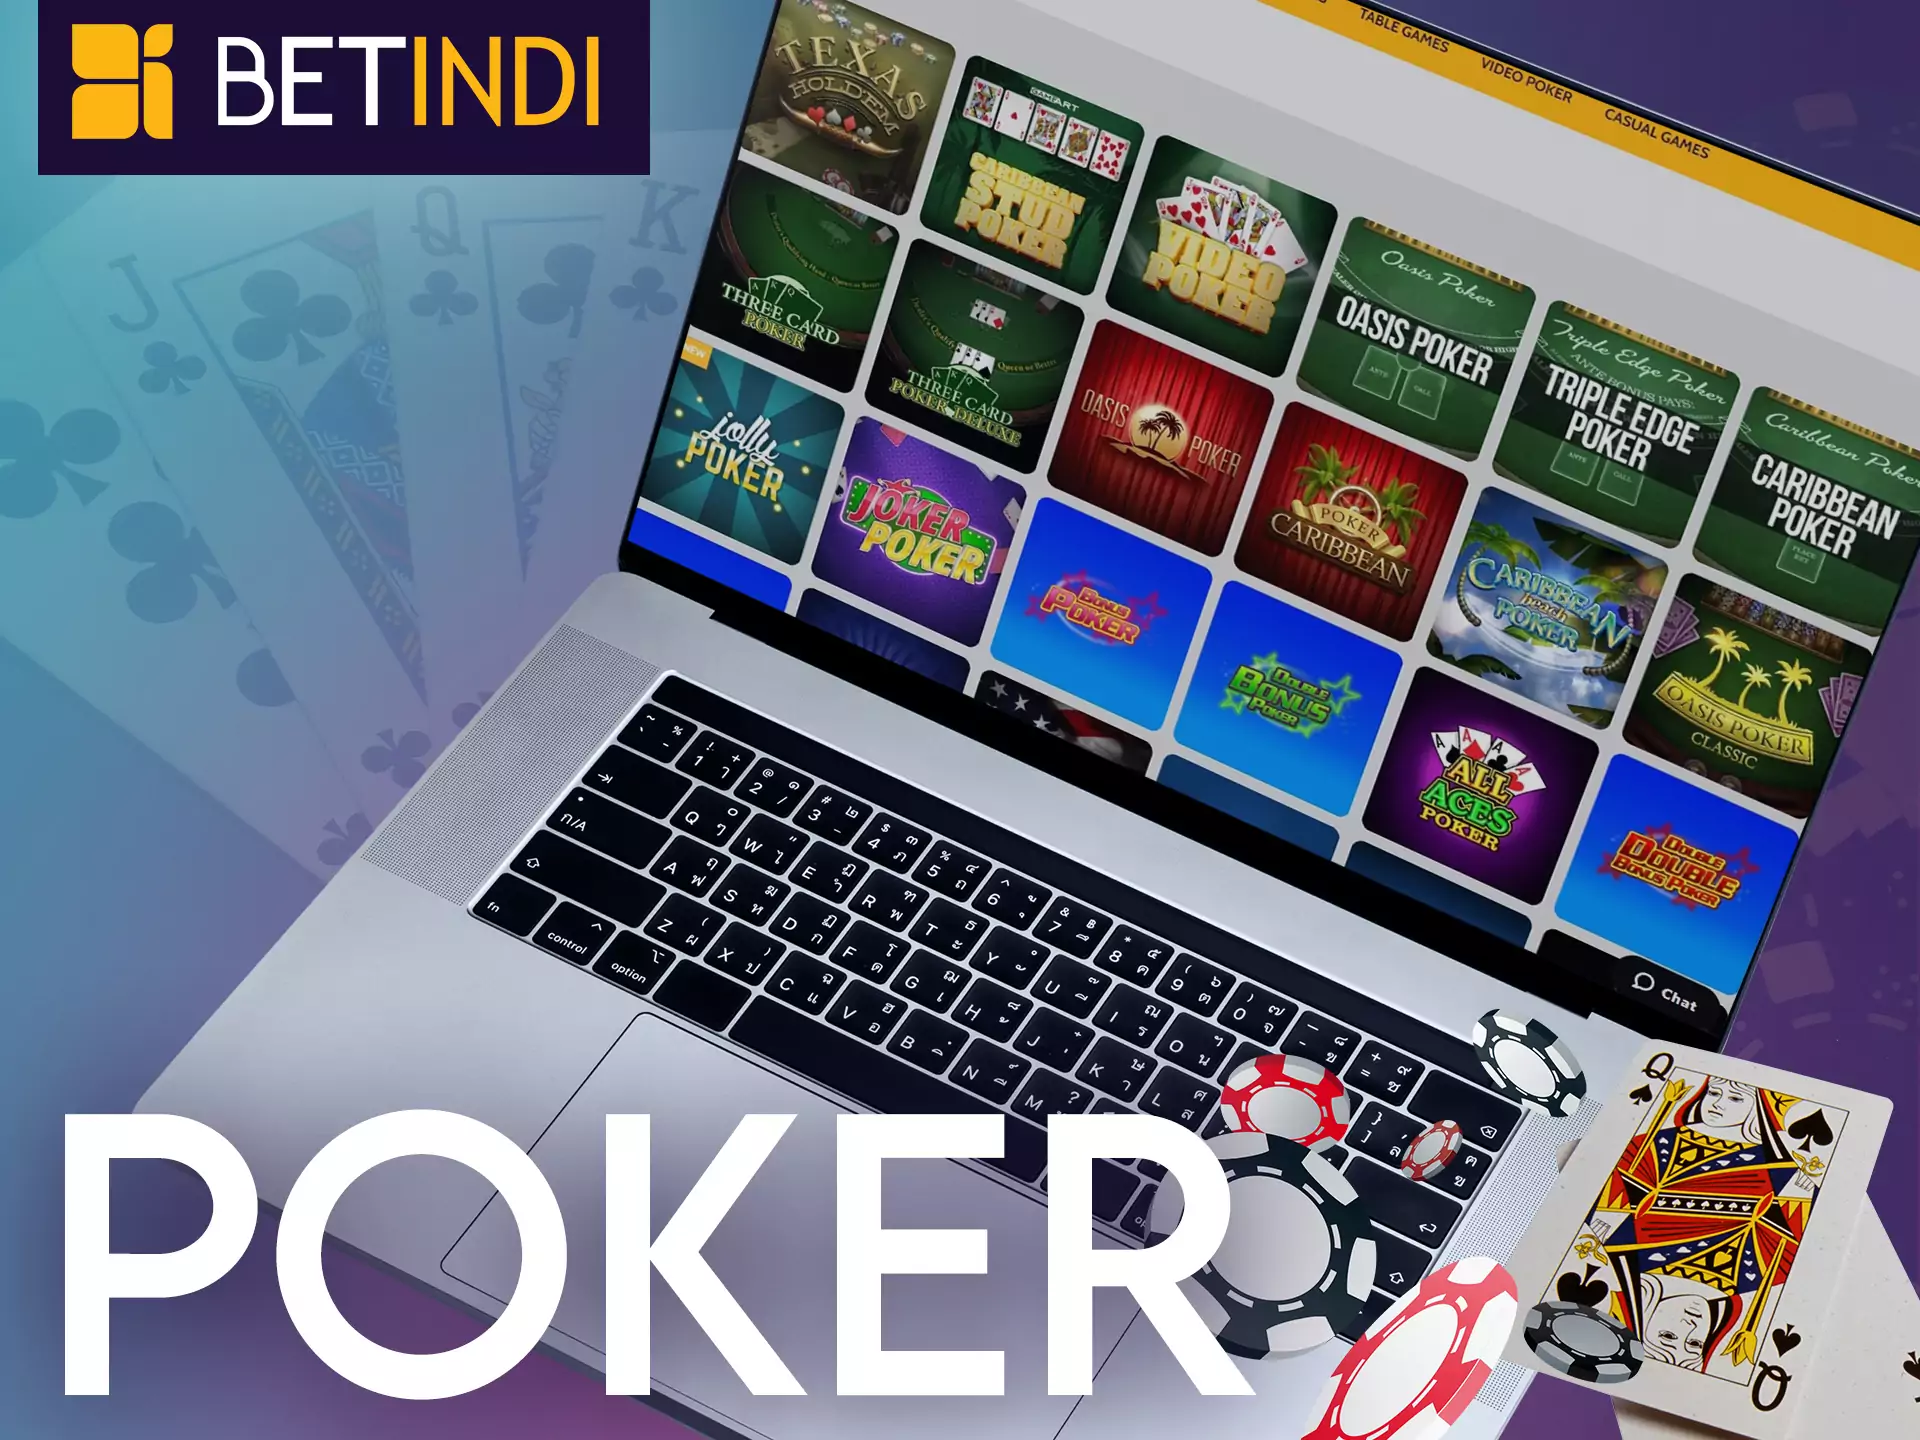 Try to play poker at Betindi Casino, enjoy the game.